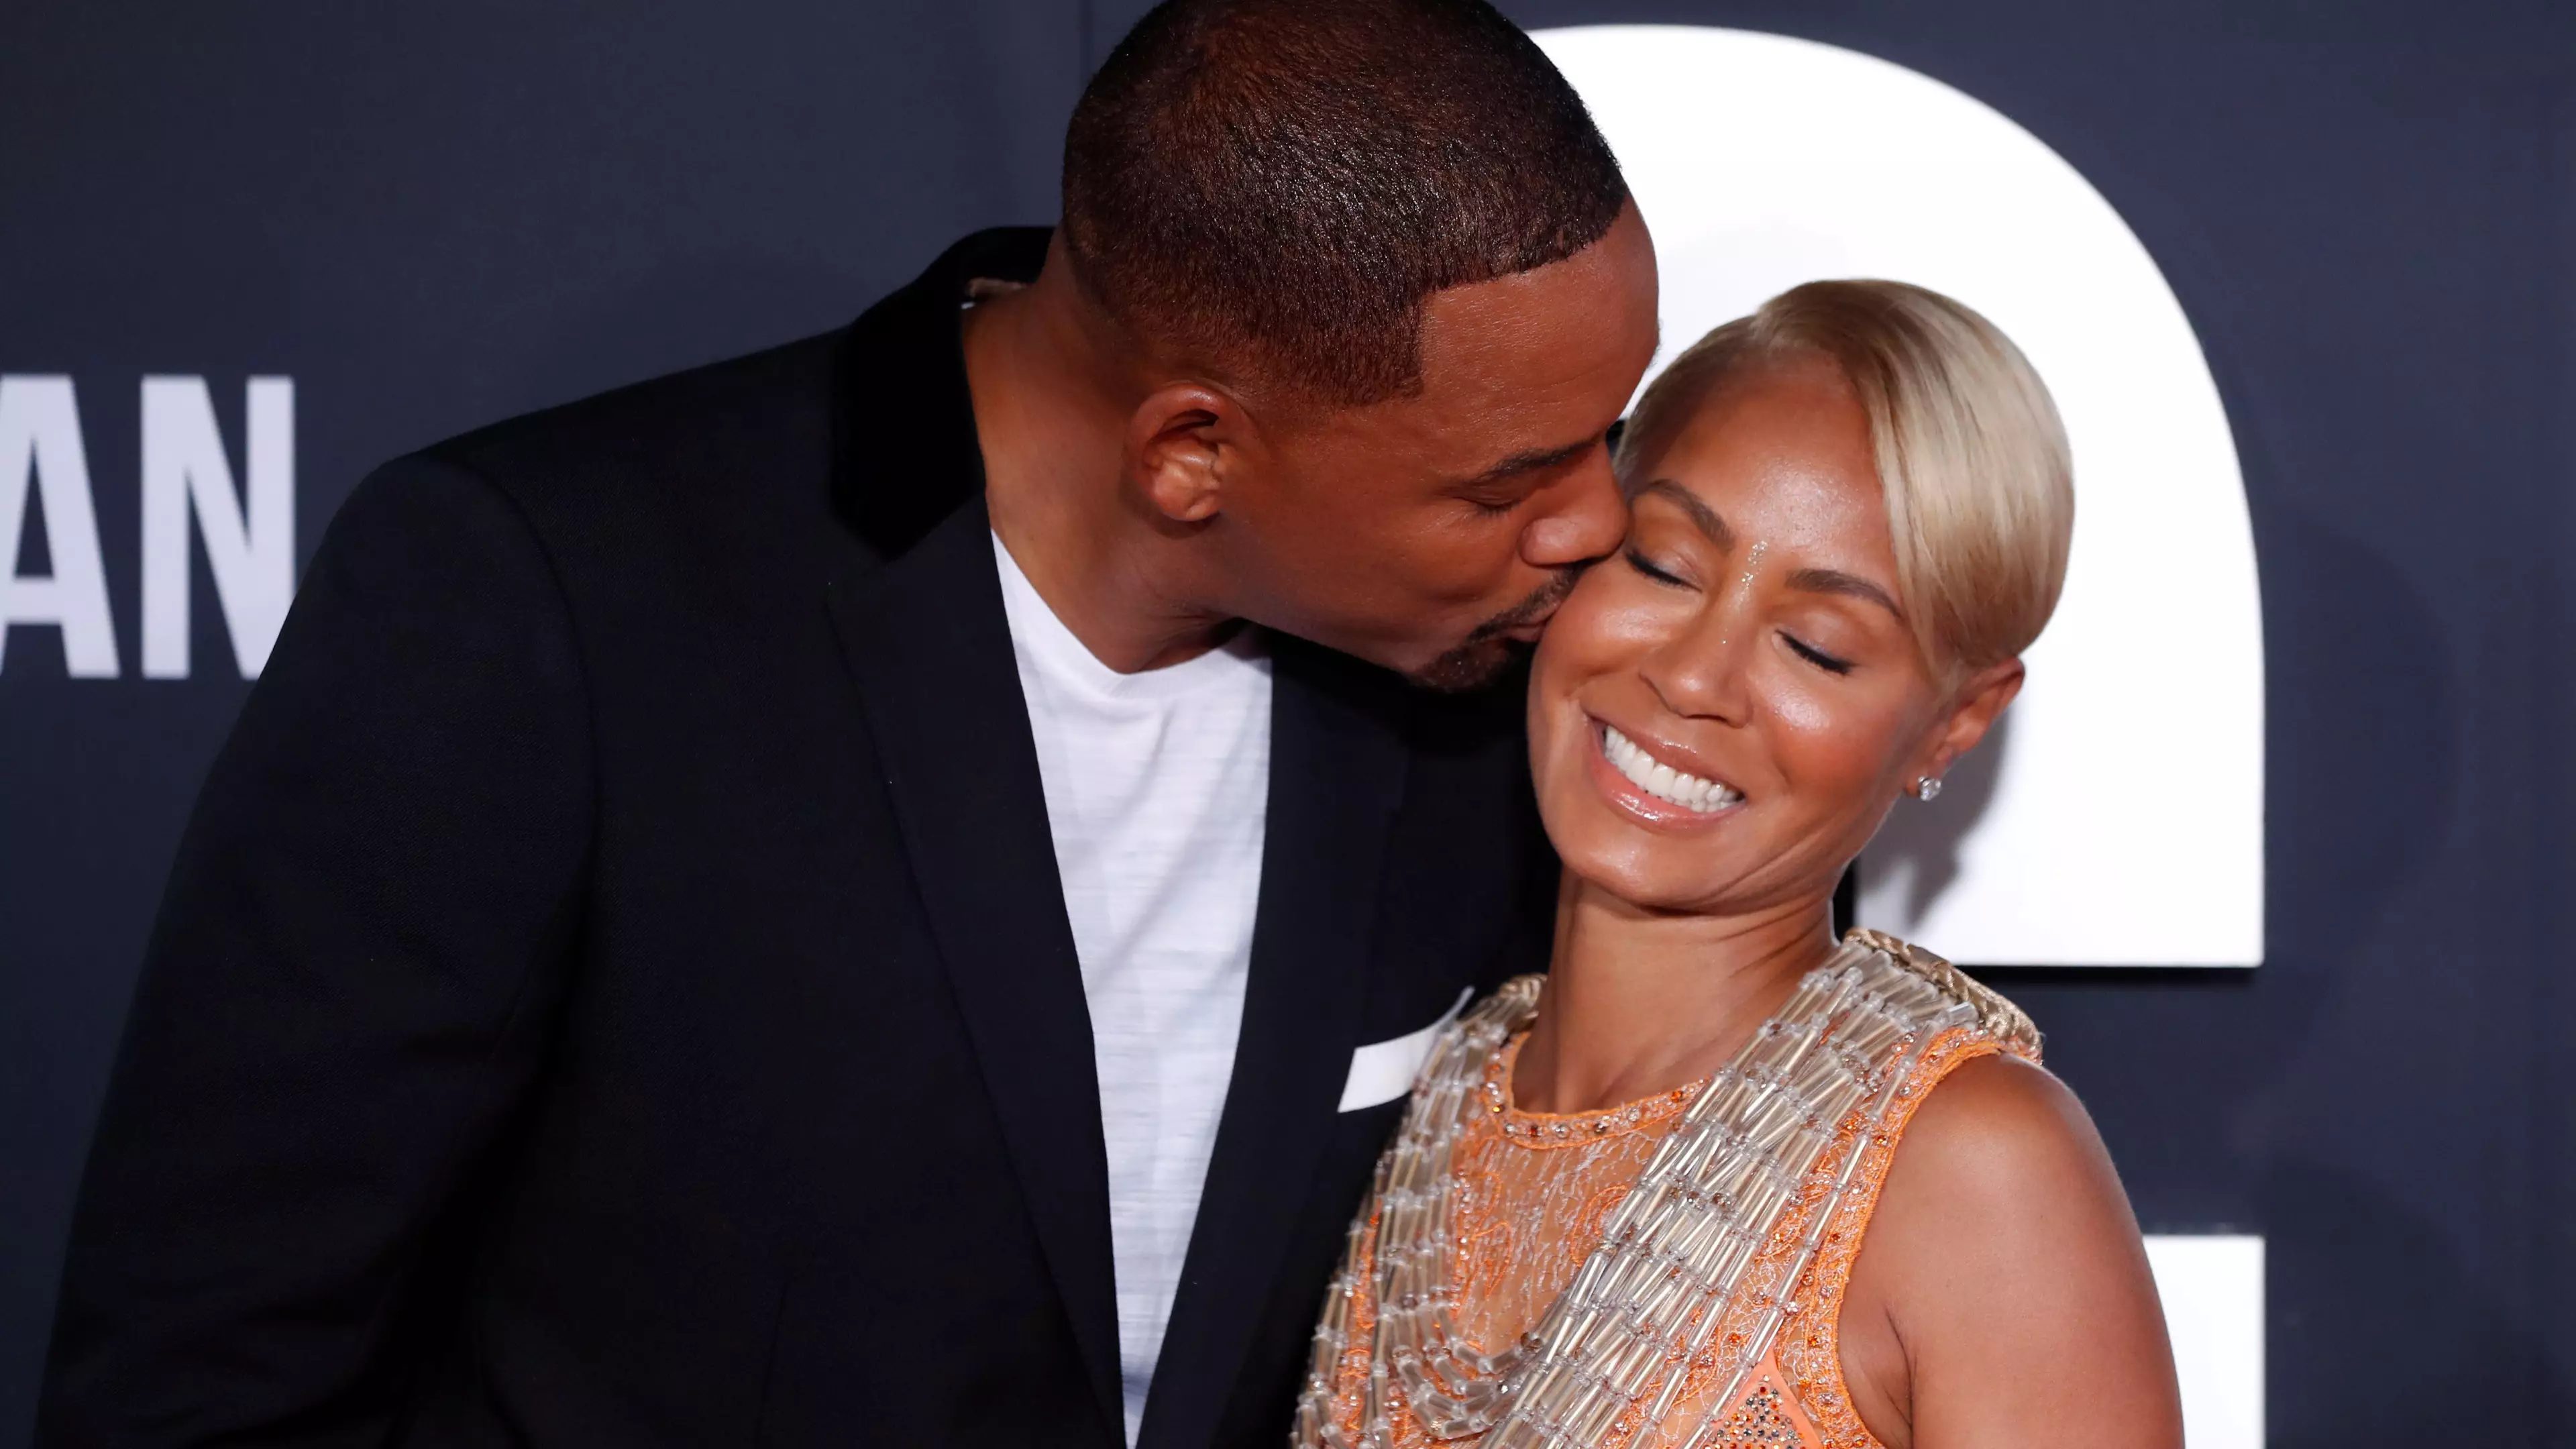 Will Smith Says He And Jada Are Pursuing ‘Love That Everybody Dreams About’